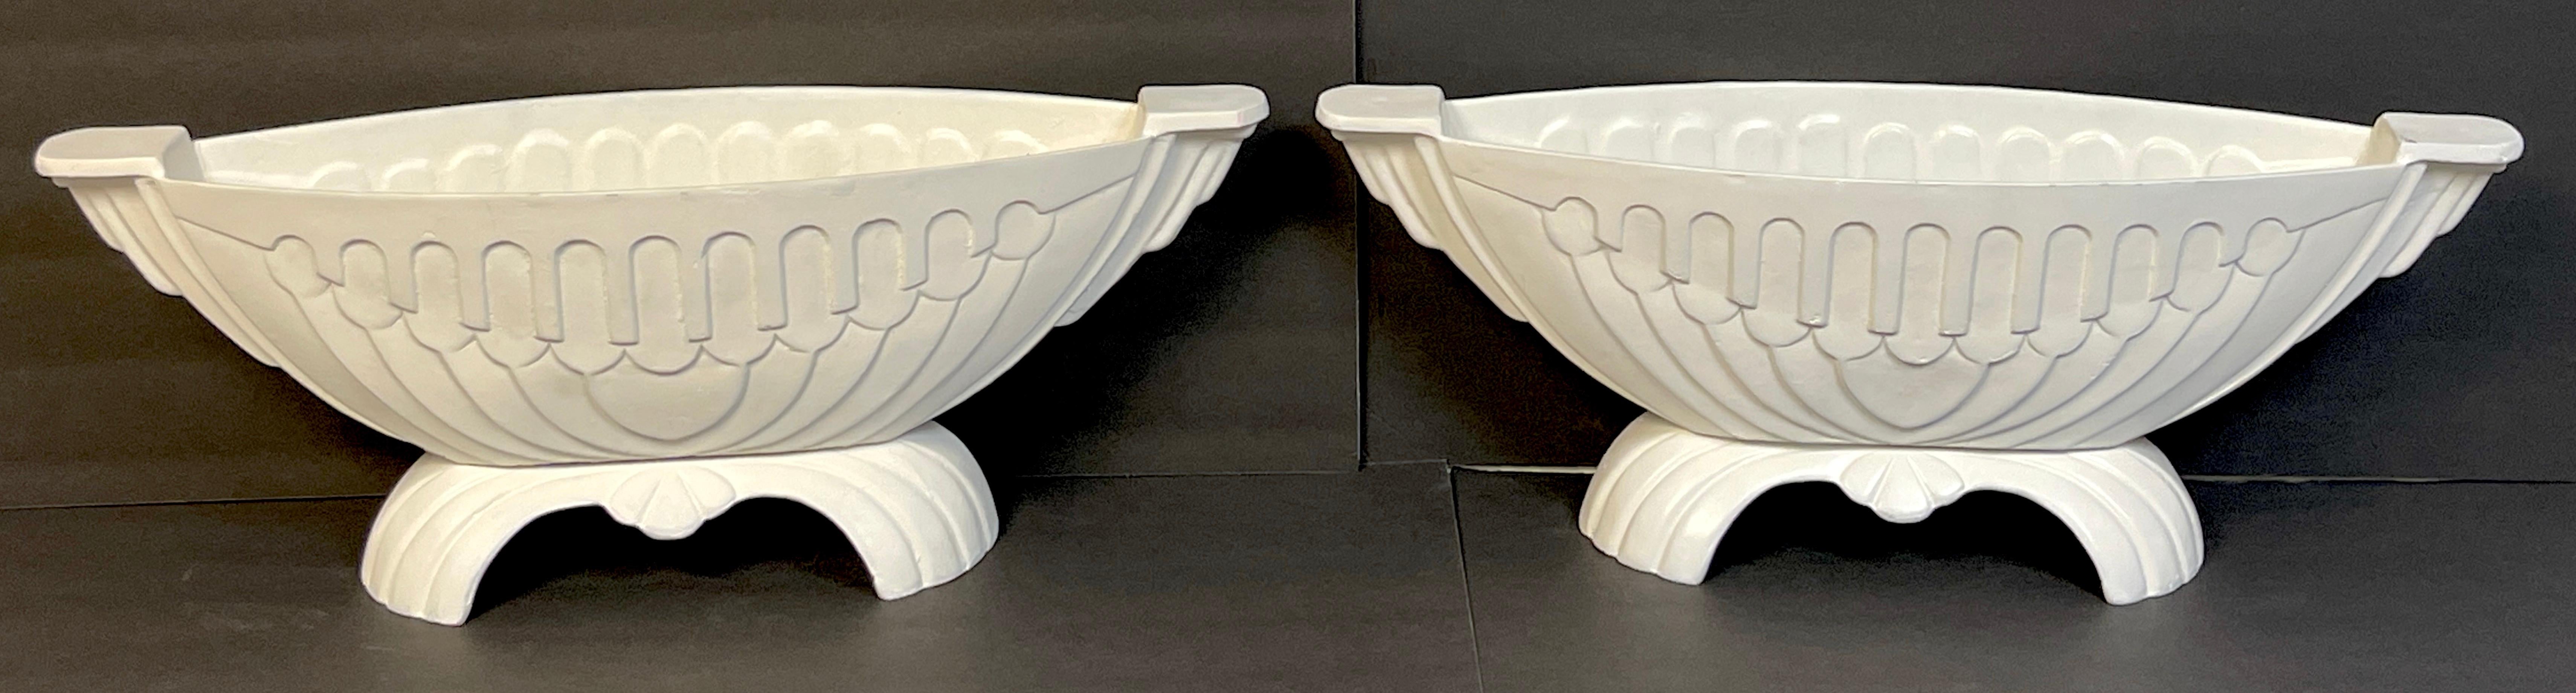 Pair of Art Deco channeled & arch design oval garden urns 
USA, Circa 1930s

Each one of cast aluminum with continuous arch and channel design, raised on 12